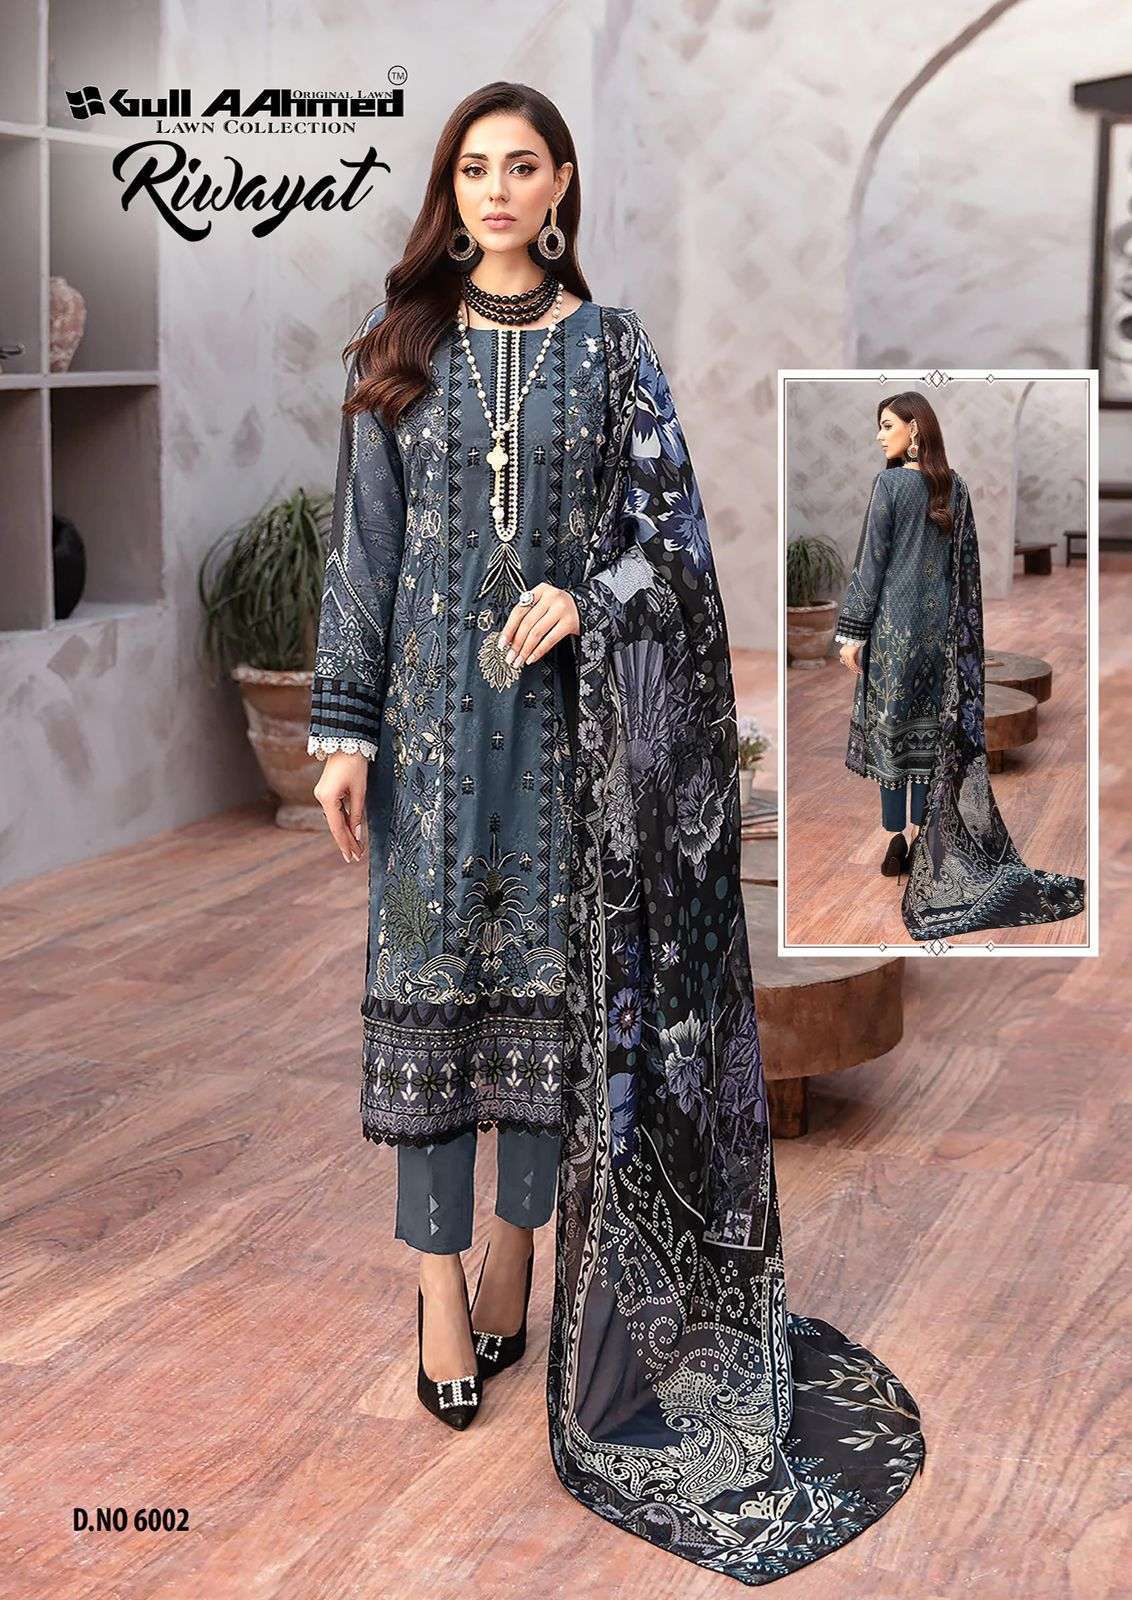 Gull A Ahmed Riwayat Vol 6 Lawn Cotton Online shopping for dress materials